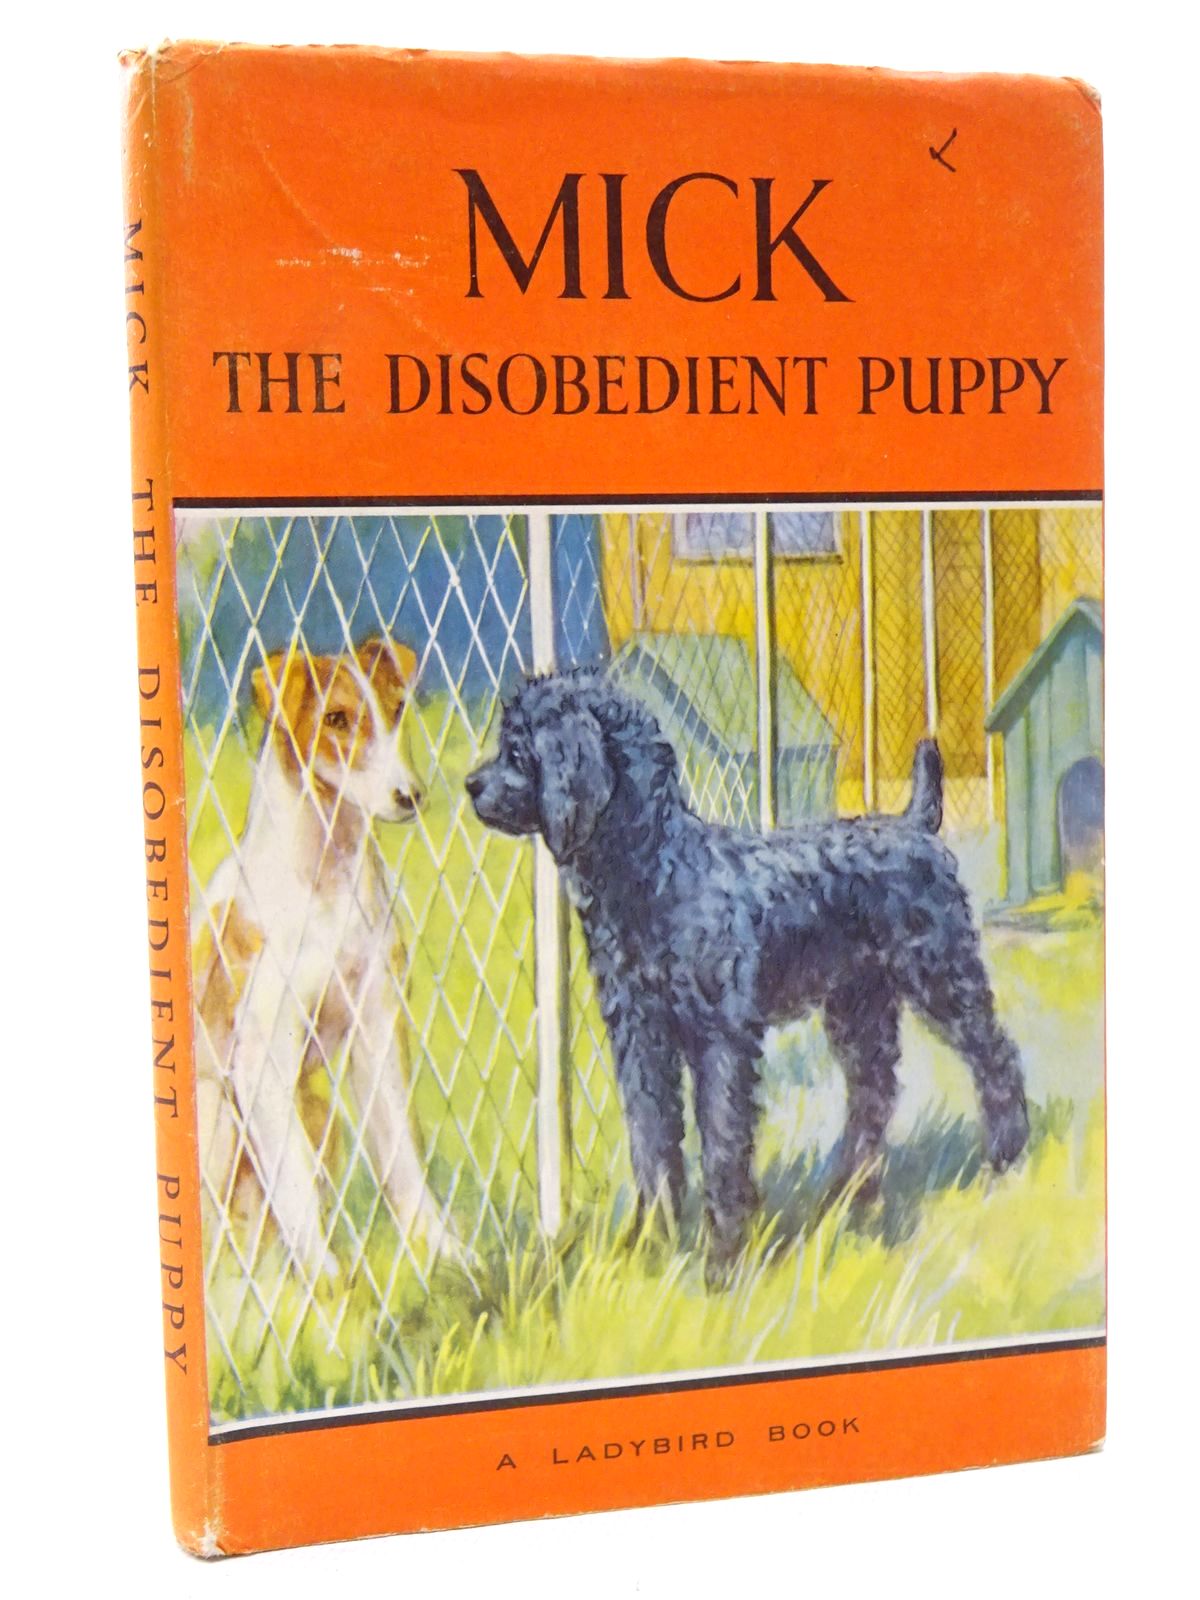 Photo of MICK THE DISOBEDIENT PUPPY written by Barr, Noel illustrated by Hickling, P.B. published by Wills & Hepworth Ltd. (STOCK CODE: 2124324)  for sale by Stella & Rose's Books